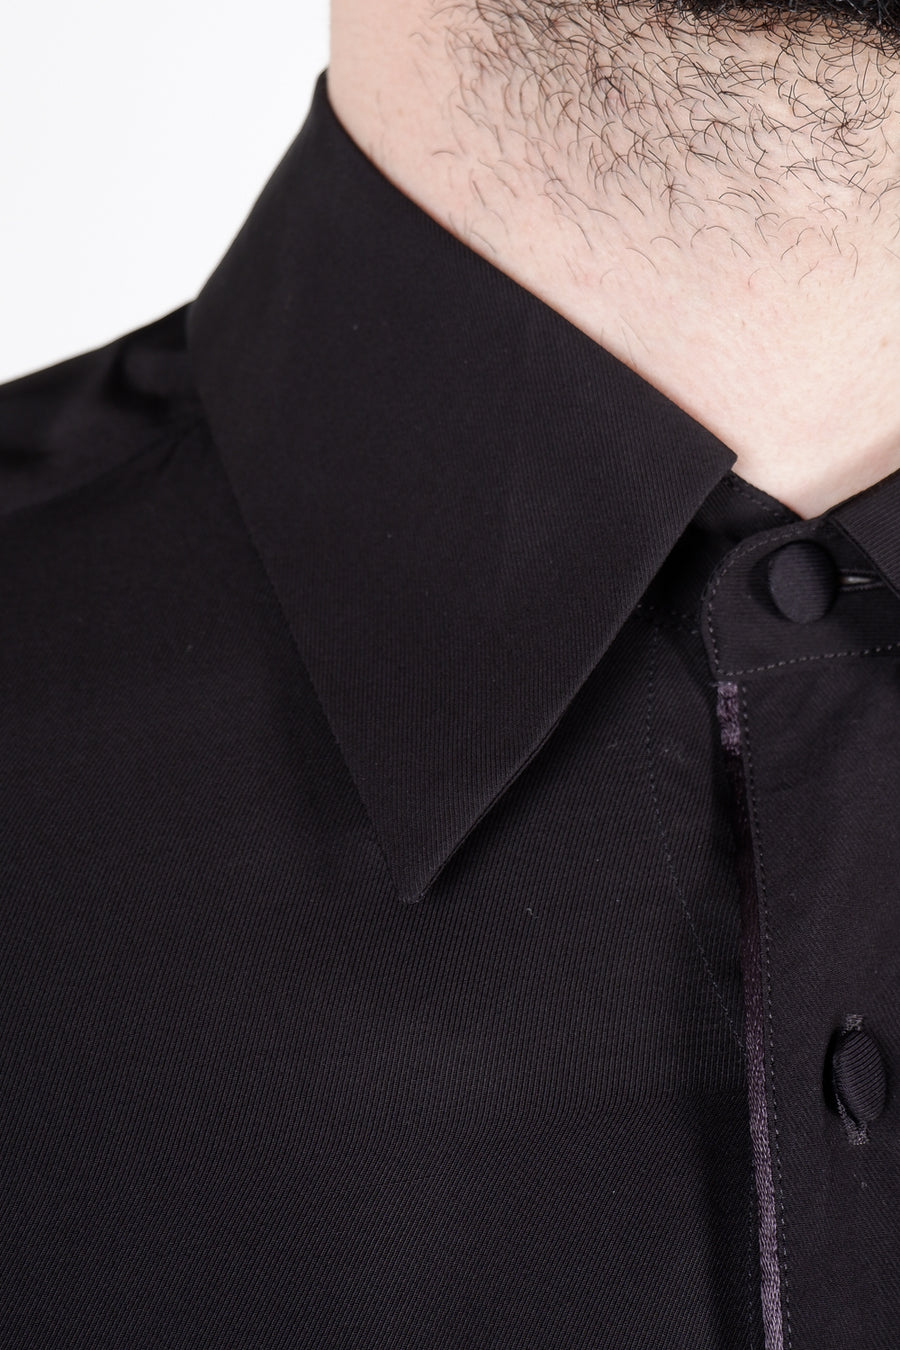 Buy the PT Torino Pure Silk Shirt Black at Intro. Spend £50 for free UK delivery. Official stockists. We ship worldwide.